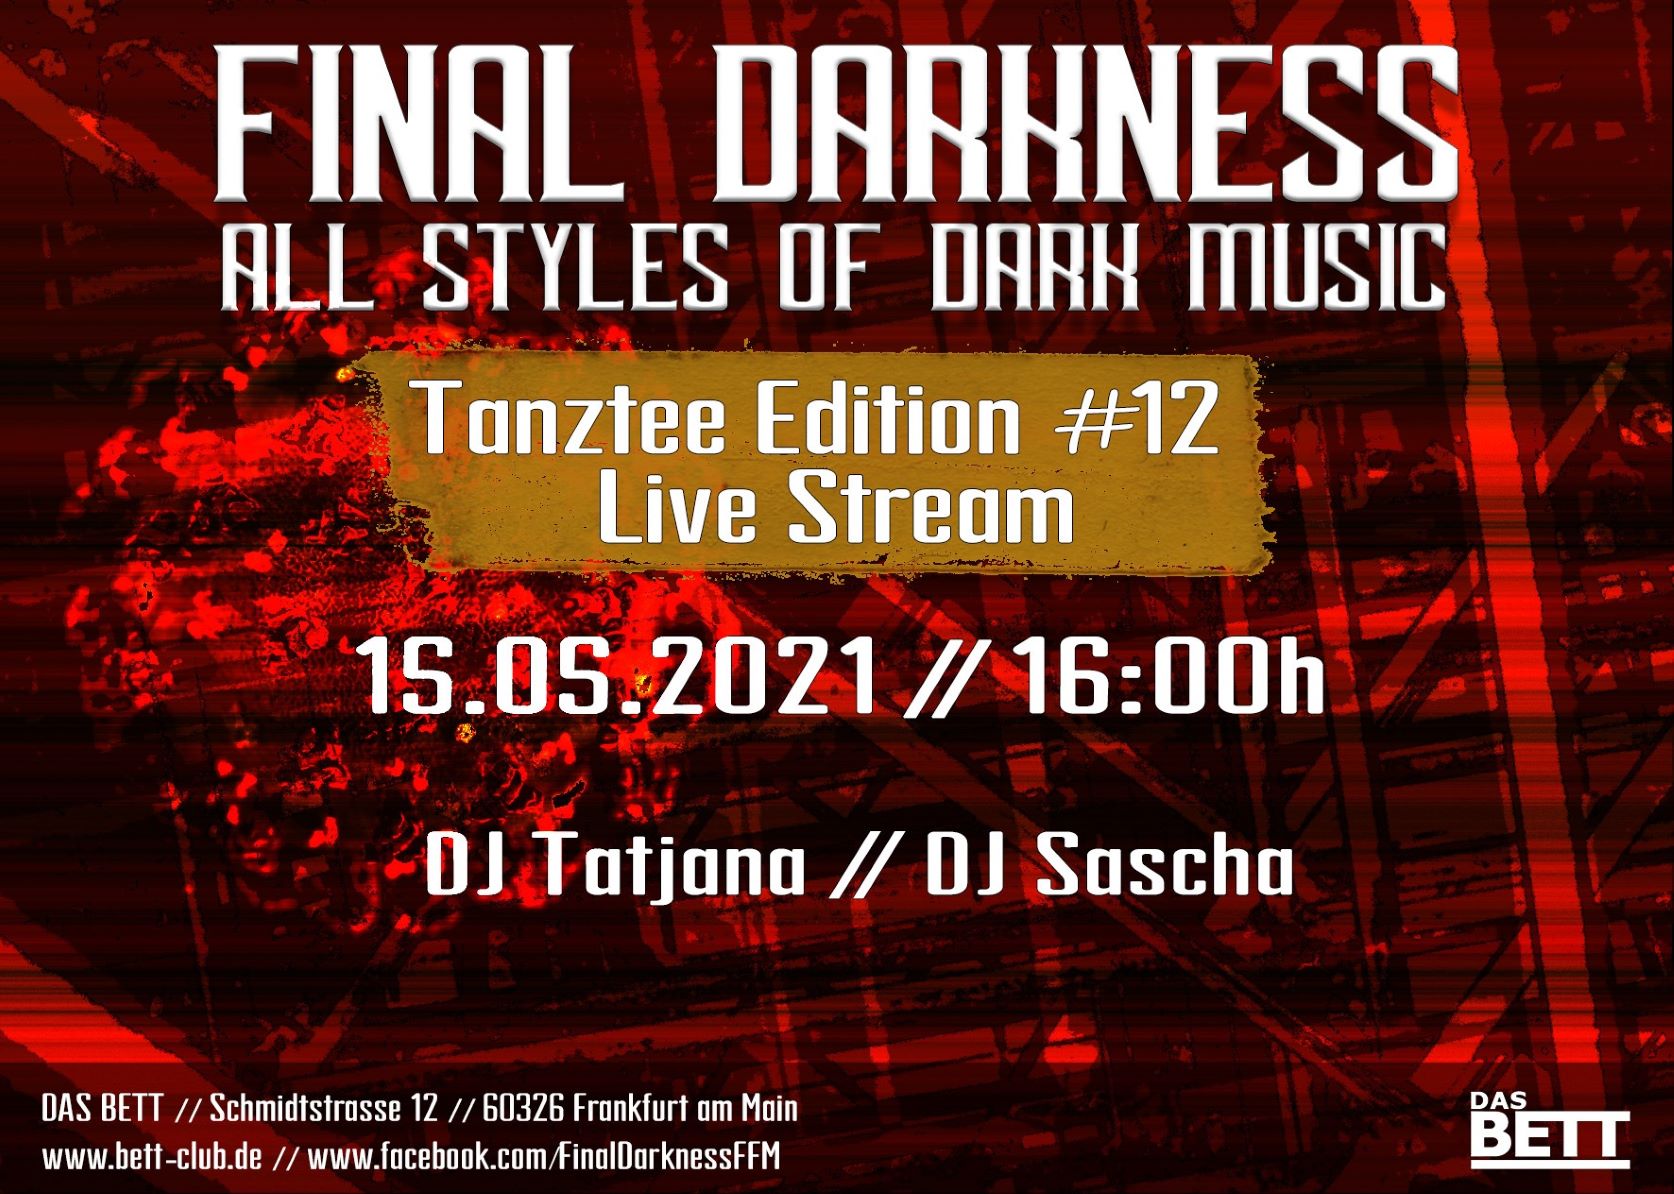 FINAL DARKNESS TANZTEE Edition #13